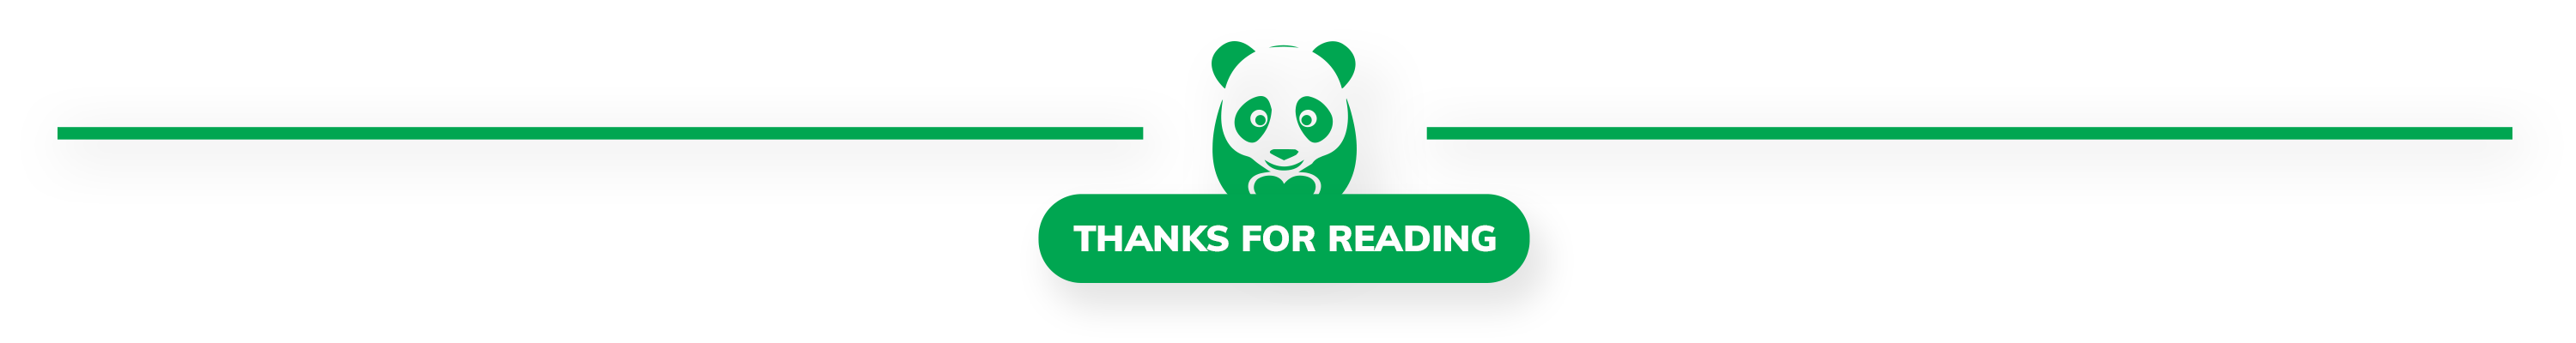 DIVIDERS_PANDA_THANKS FOR READING.png